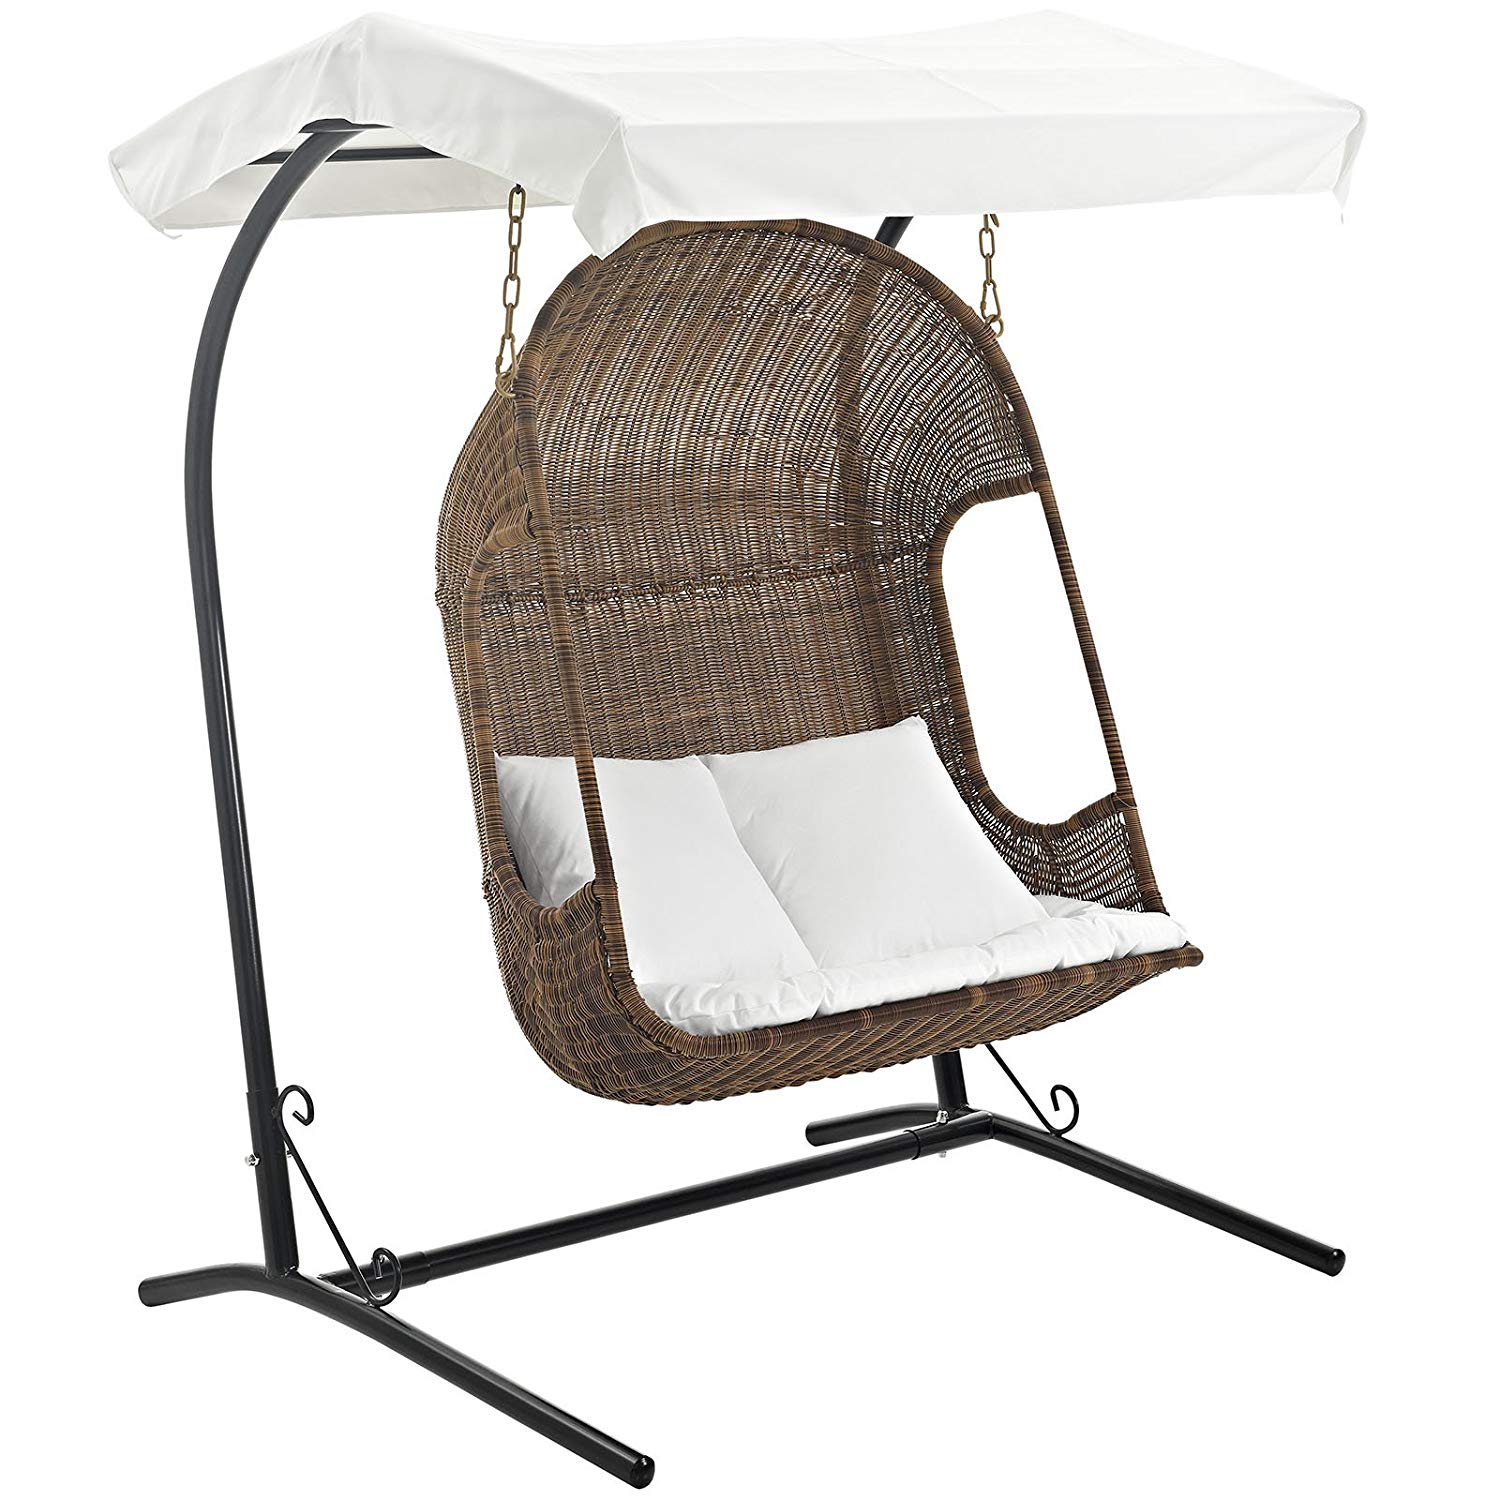 Simple wicker style 2 person patio swing with canopy